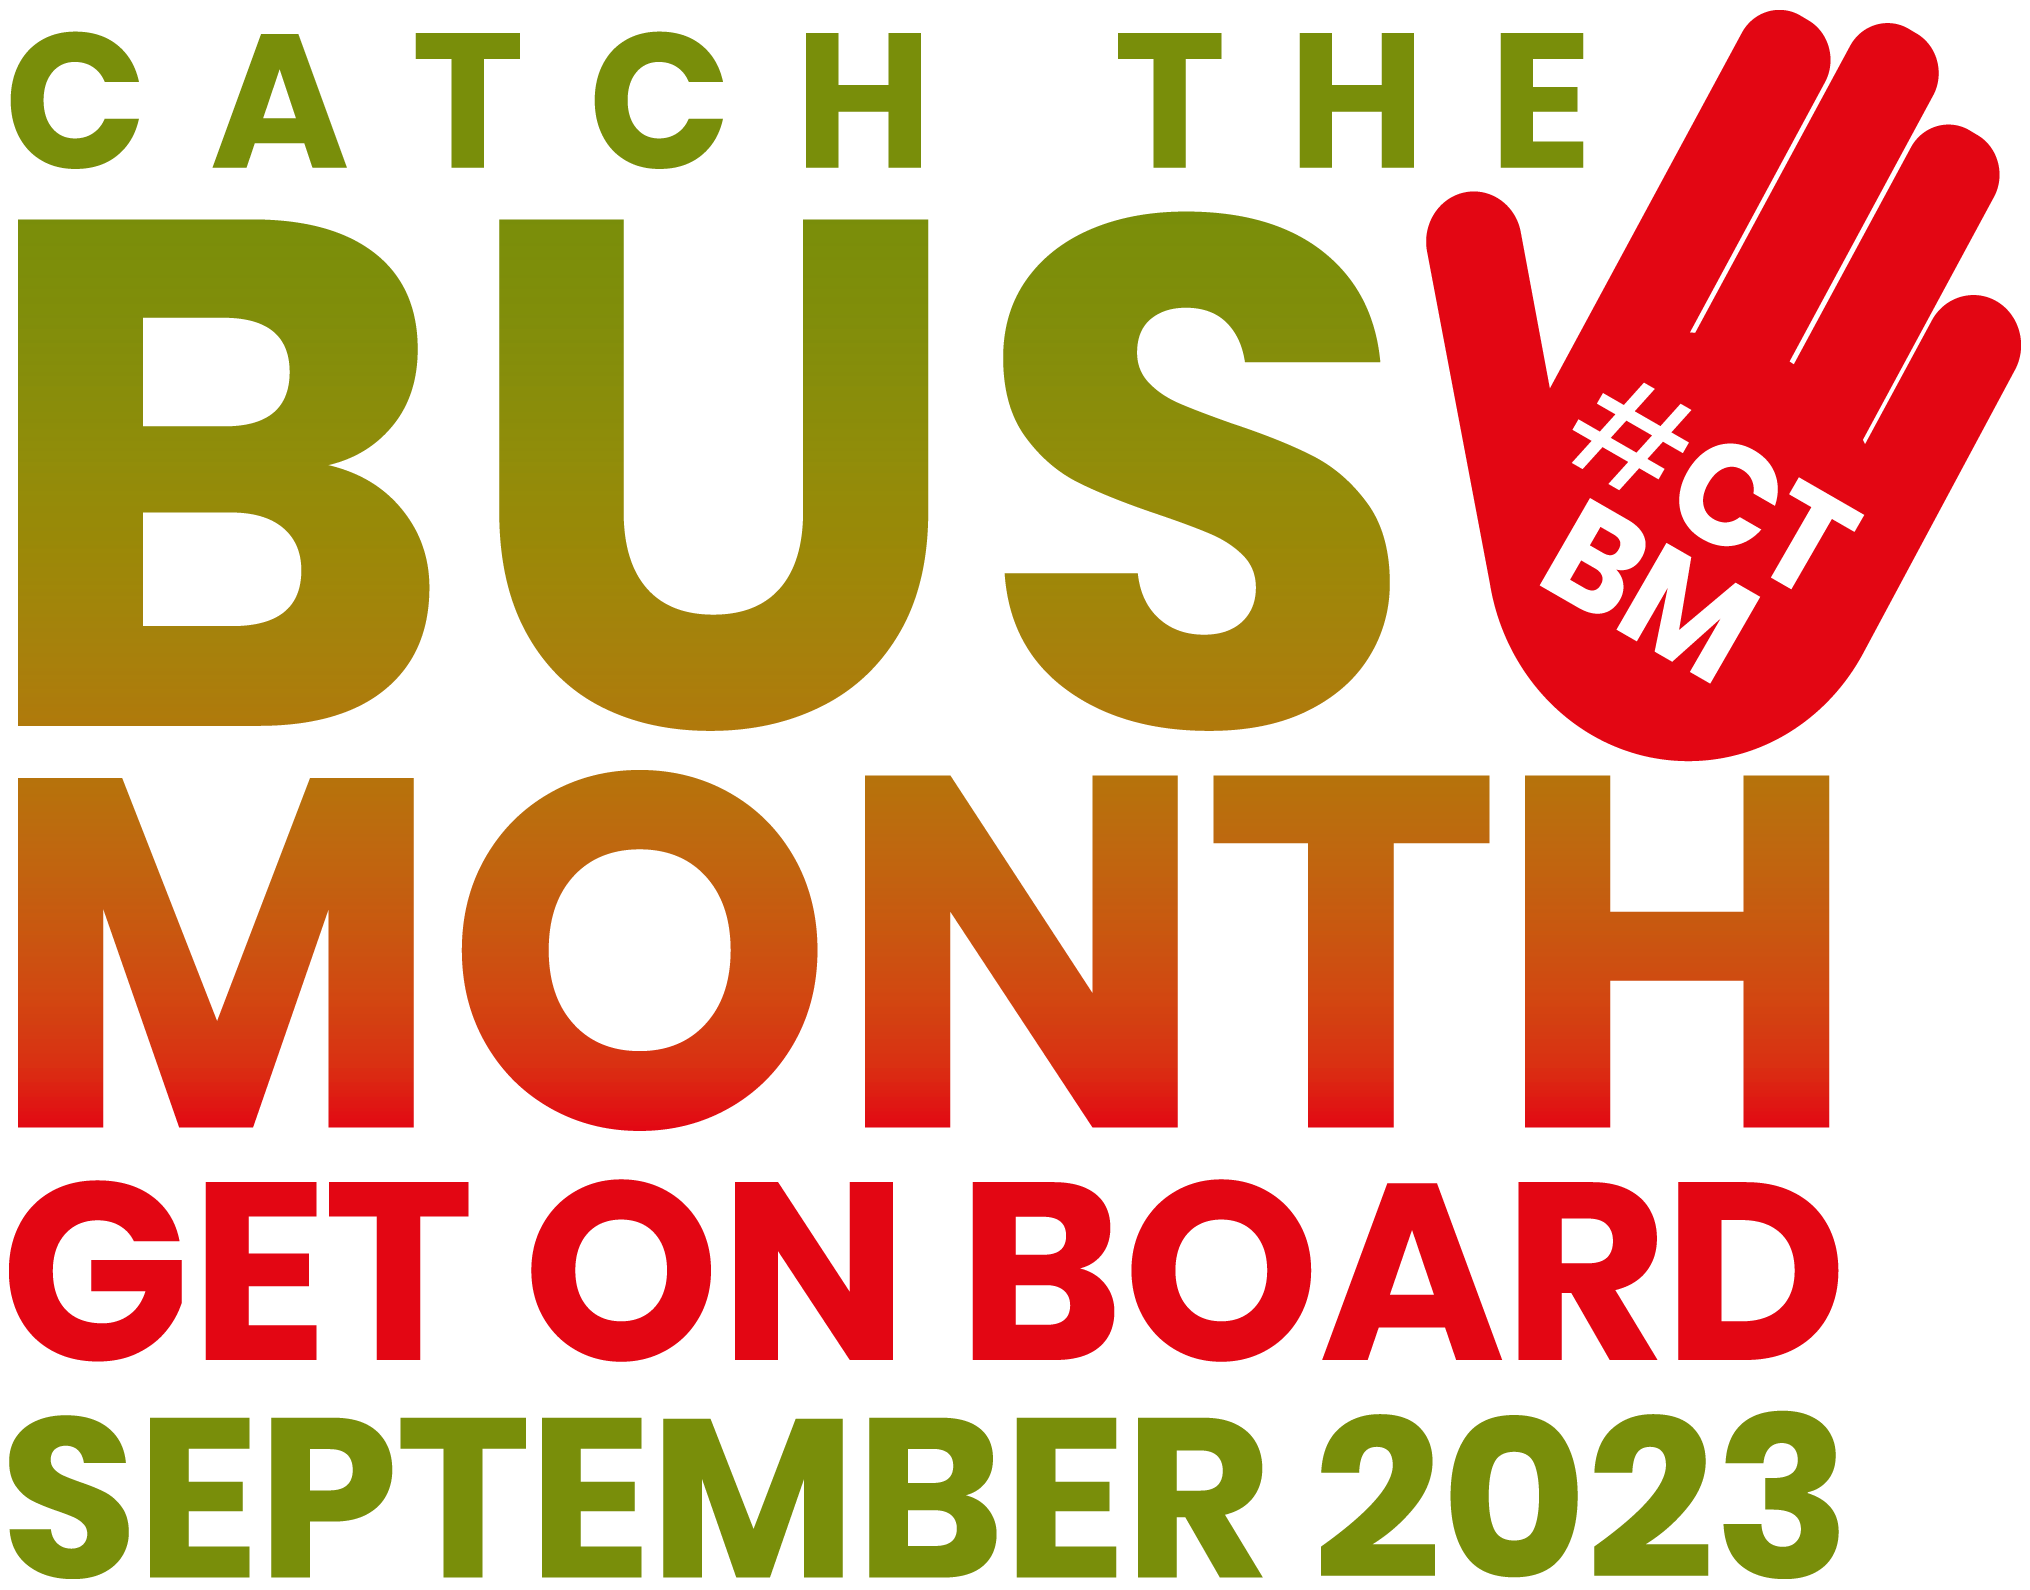 Partner Pack now available for Catch the Bus Month participants